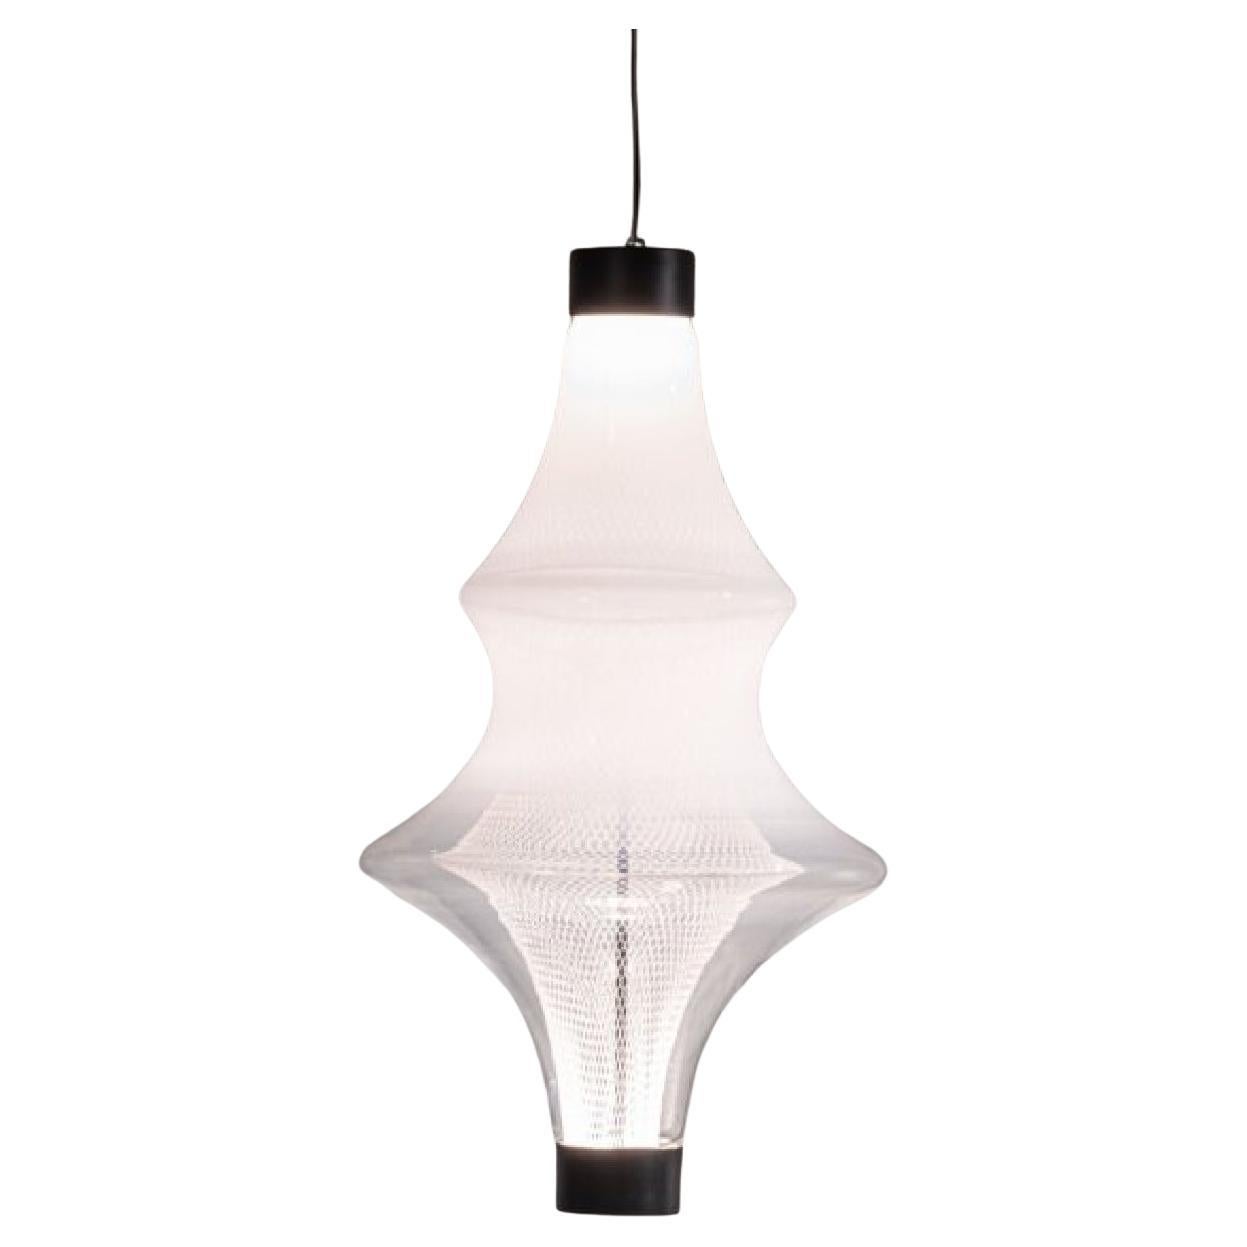 NASSE 01 Pendant lamp by Marco Zito & BTM for Wonderglass For Sale